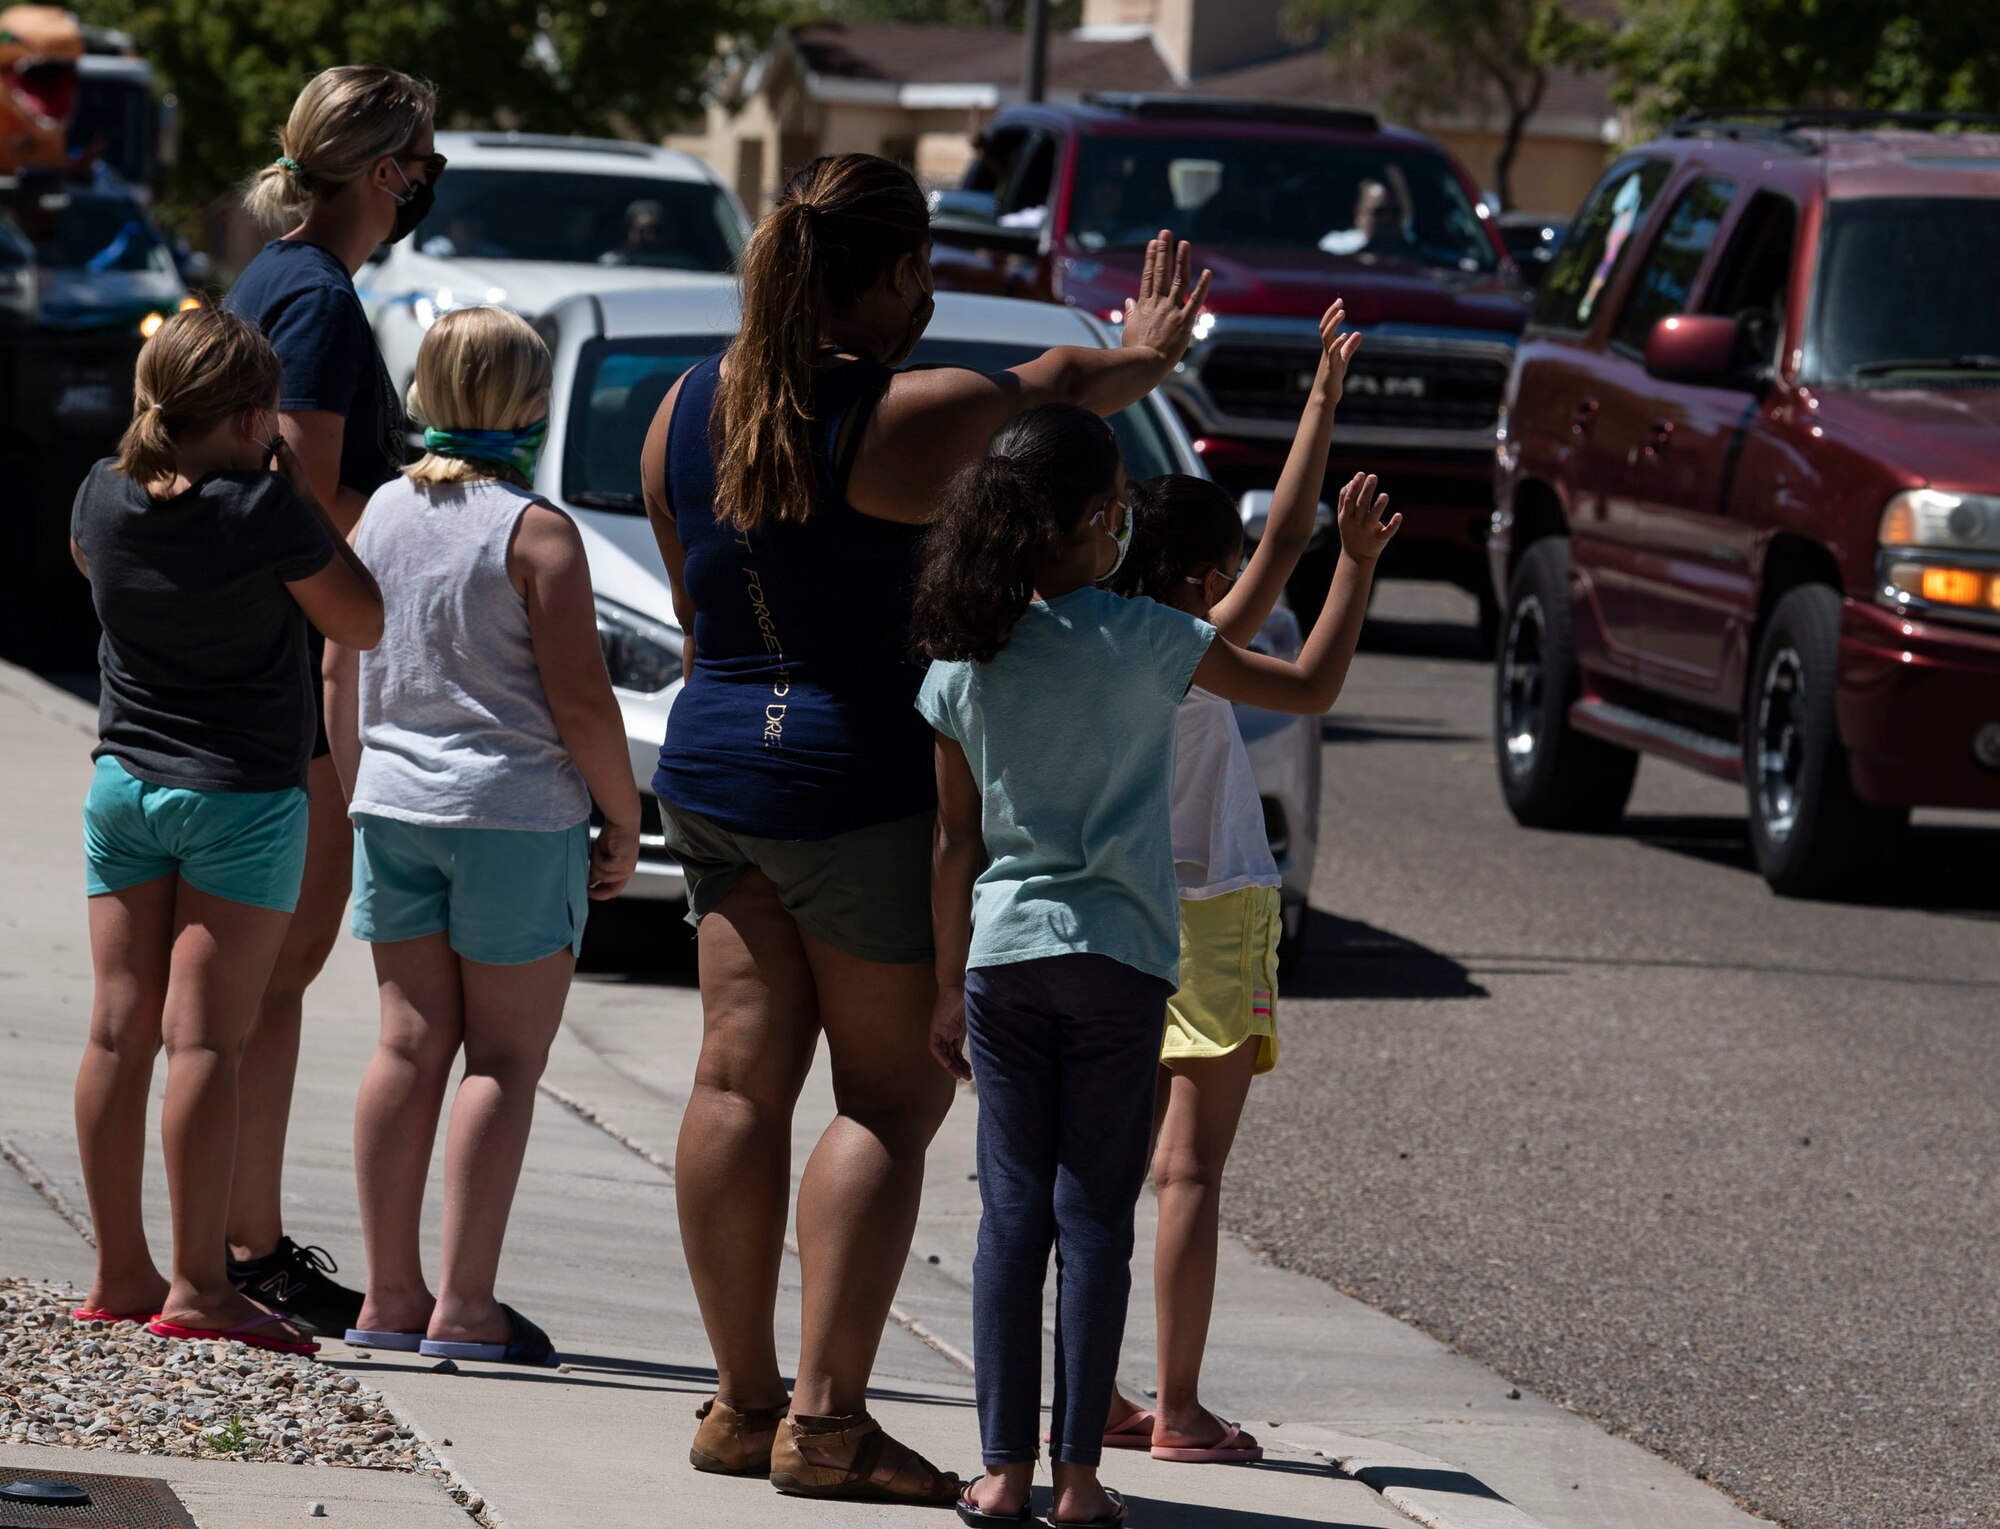 Families wave as a parade passes by.